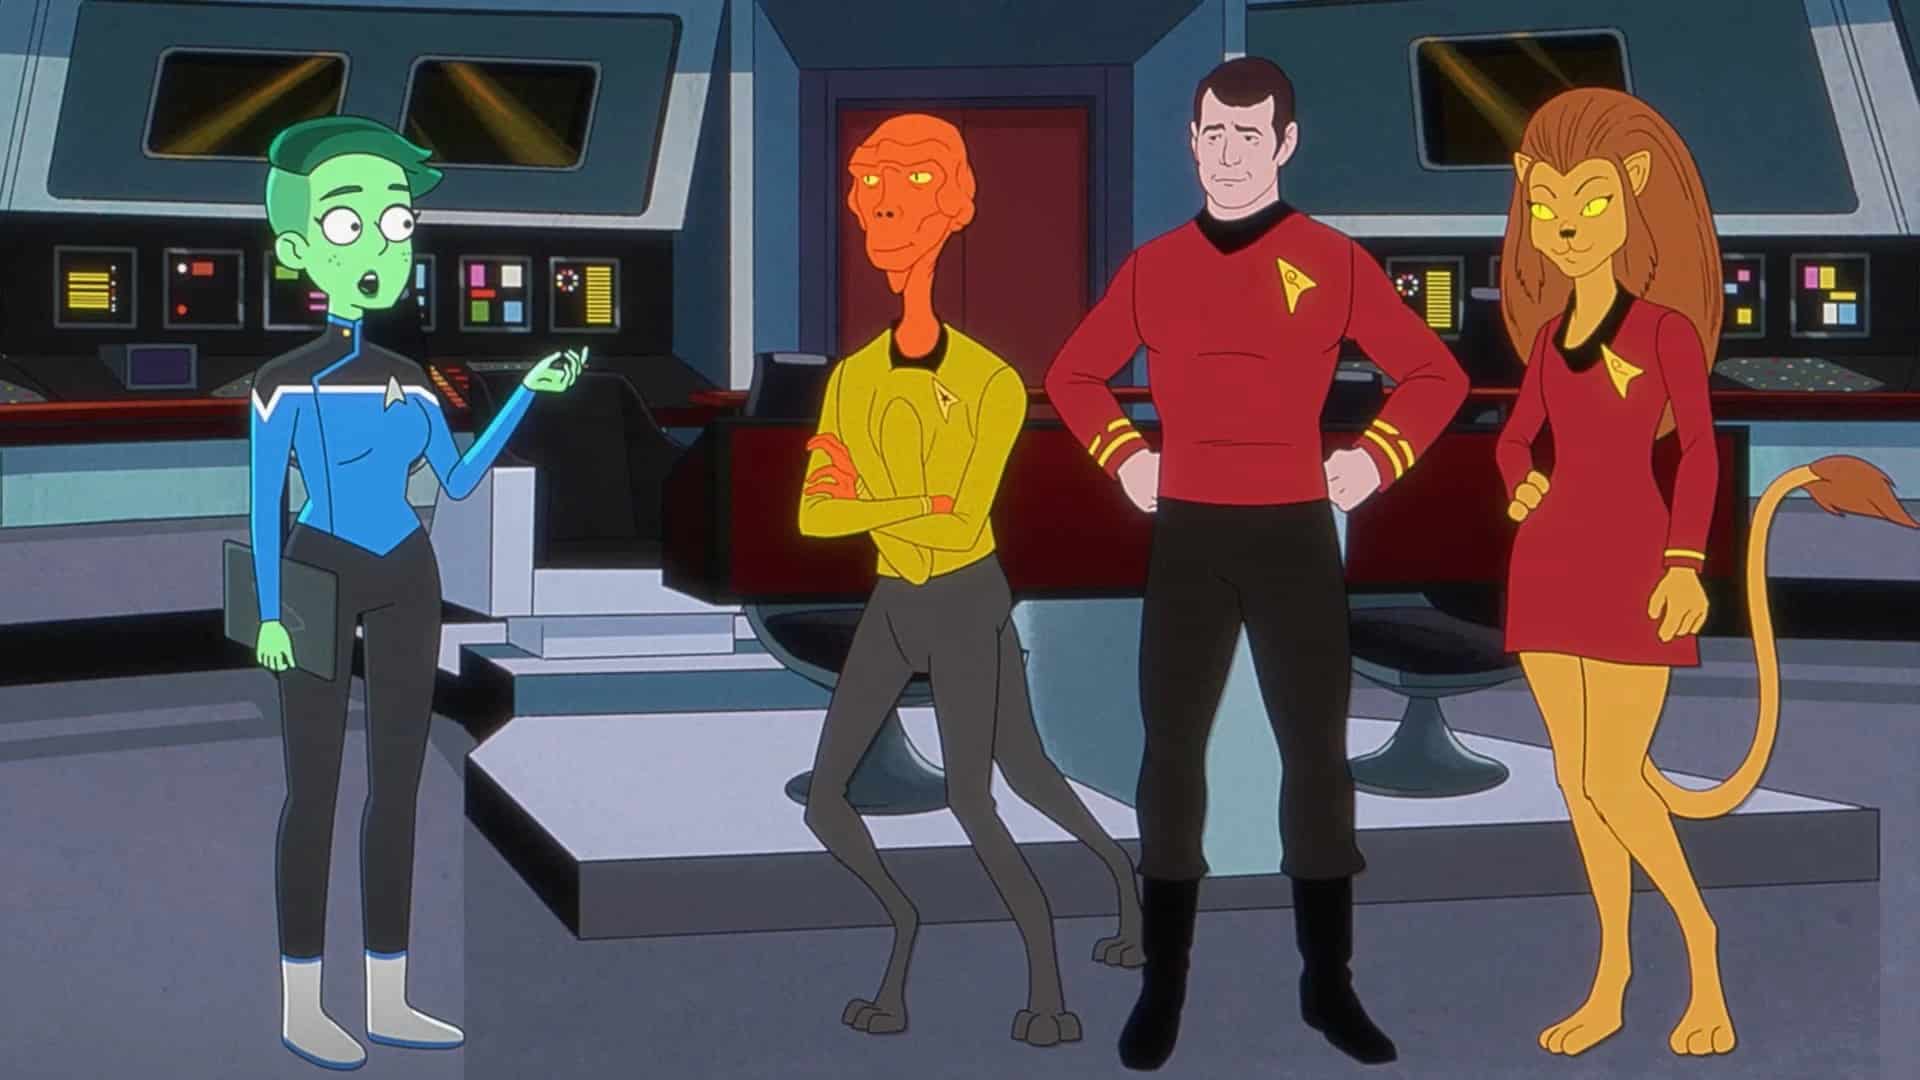 Tendi addresses Arex, Scotty and M'Ress on the bridge of the USS Enterprise from The Animated Series. Also, they may all be holograms.